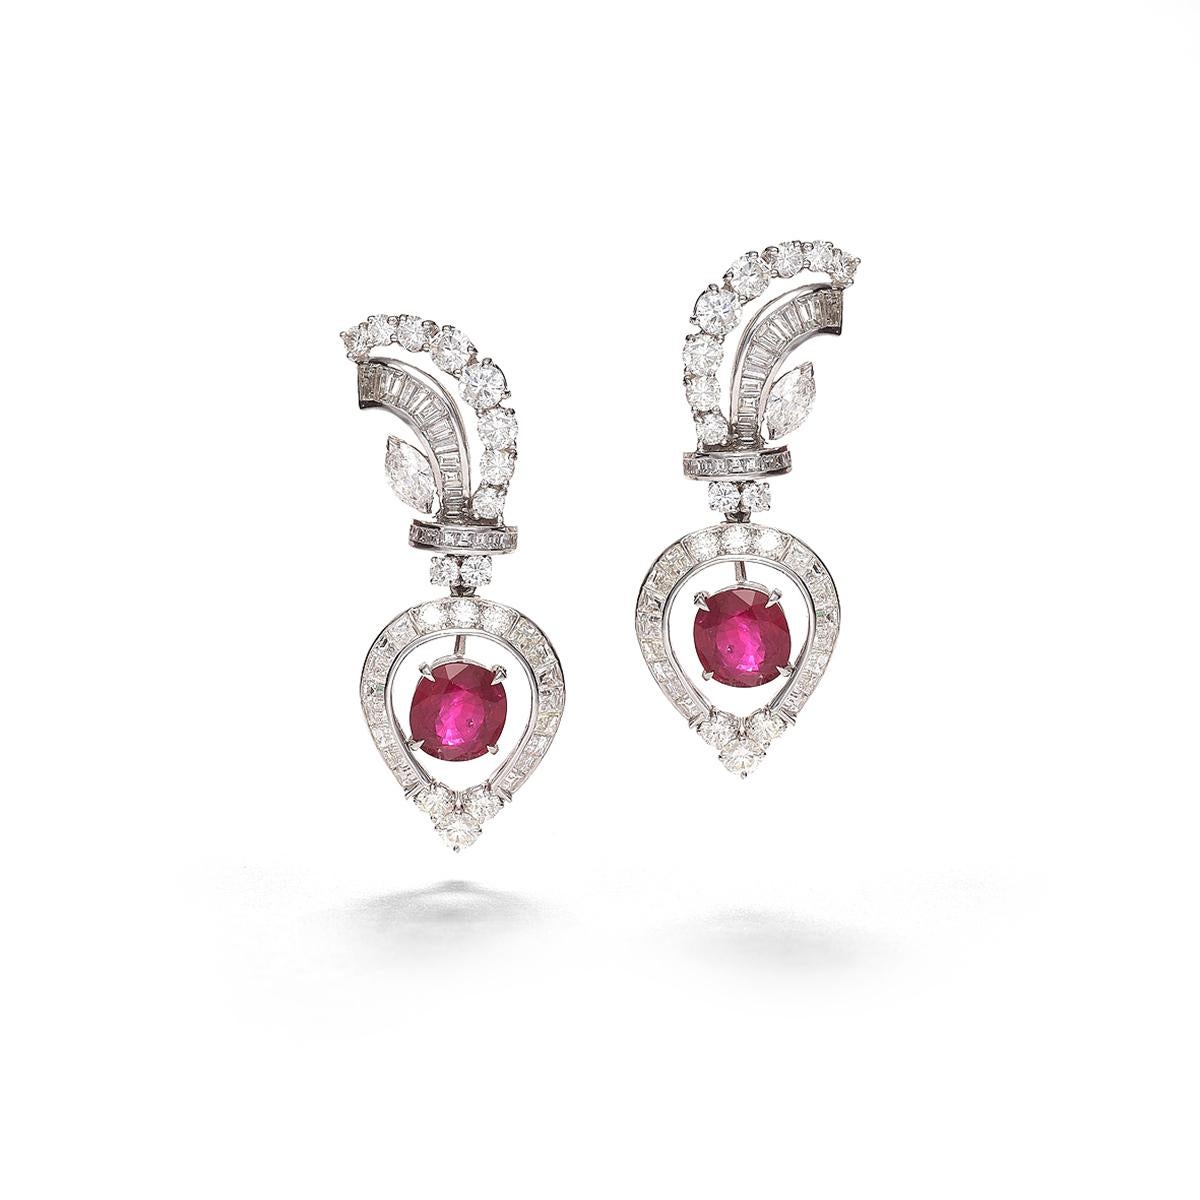 Earrings in 18kt white gold set with 2 rubies 6.66 cts and fancy cut diamonds 7.20 cts